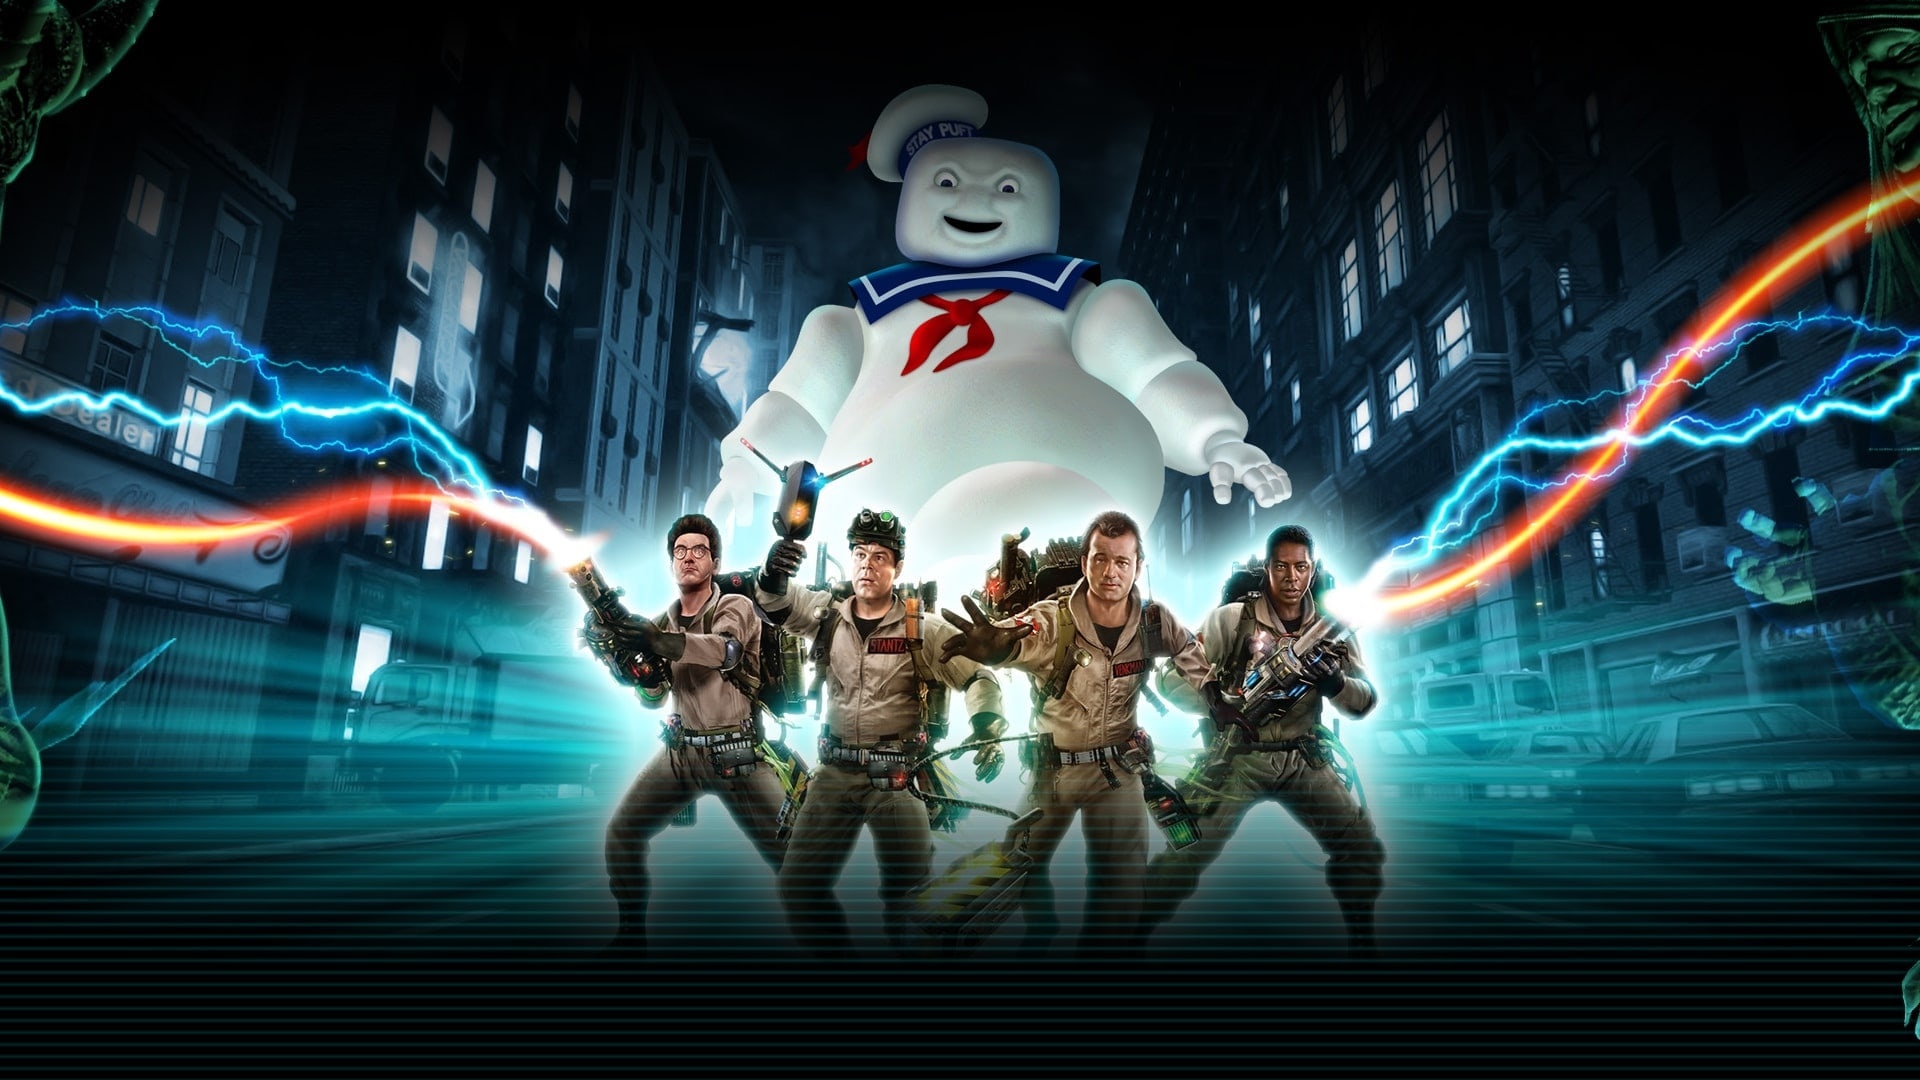 Marshmallow, Ghostbusters, Movies, supernatural imagery, 1920x1080 Full HD Desktop